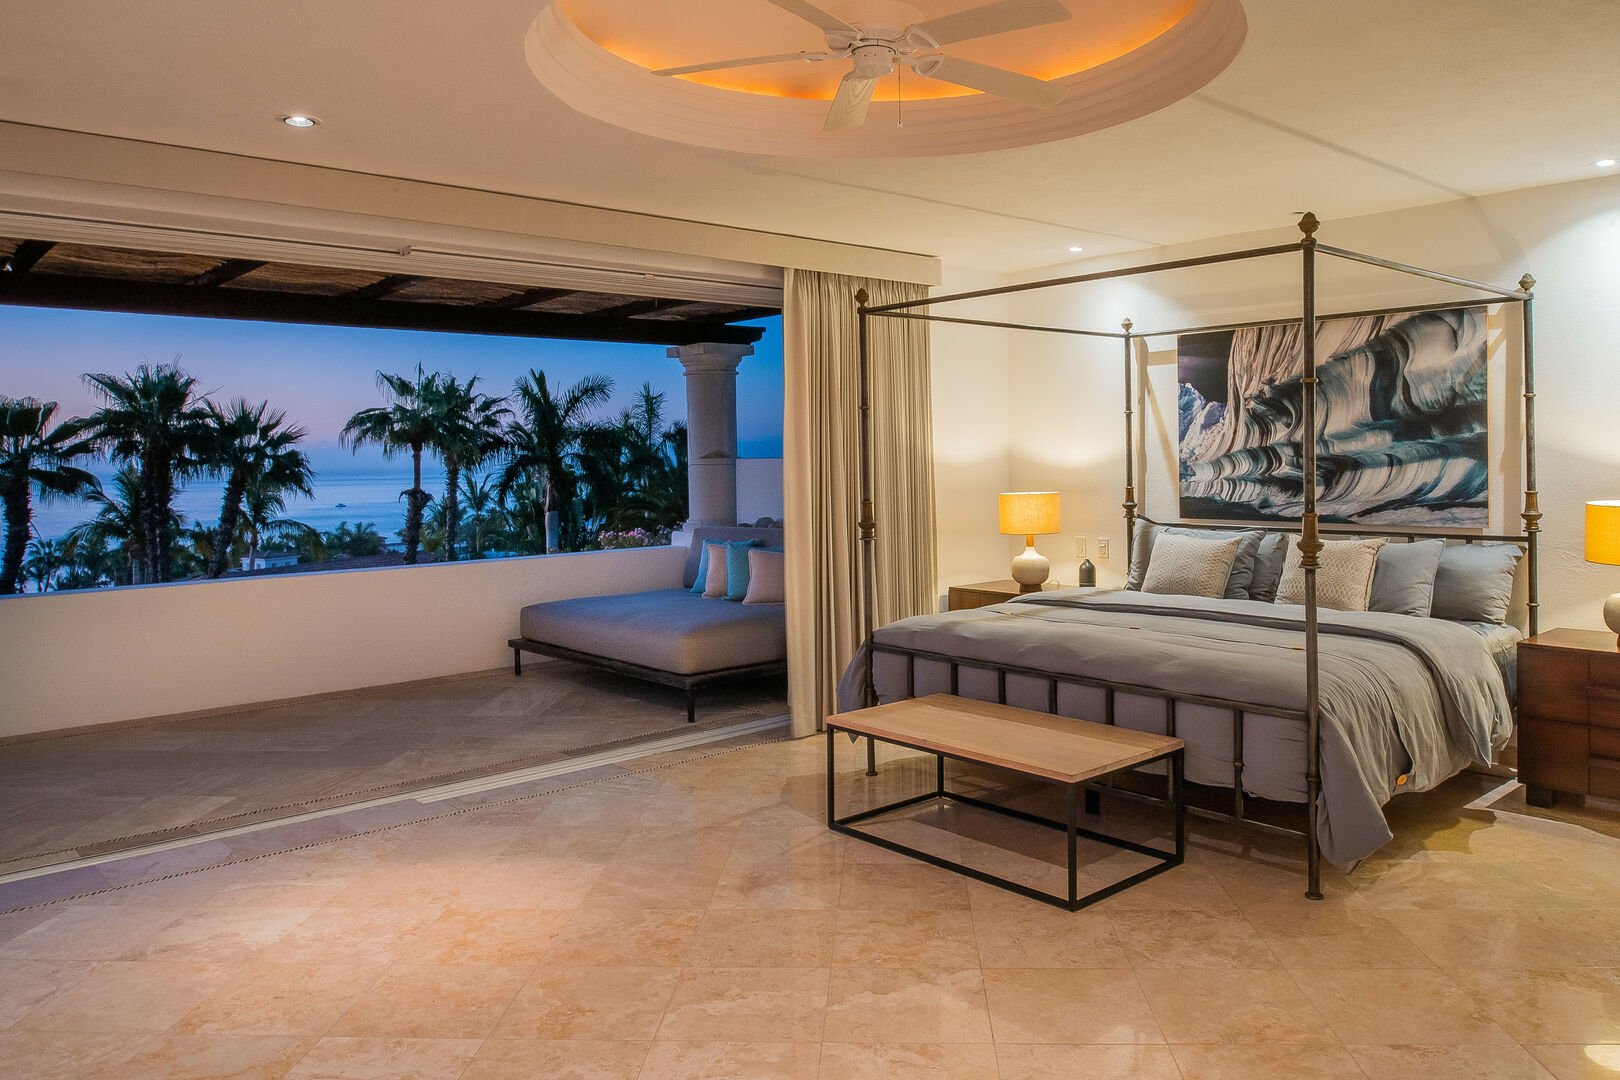 A master bedroom in this Los Cabos villa with a large balcony.